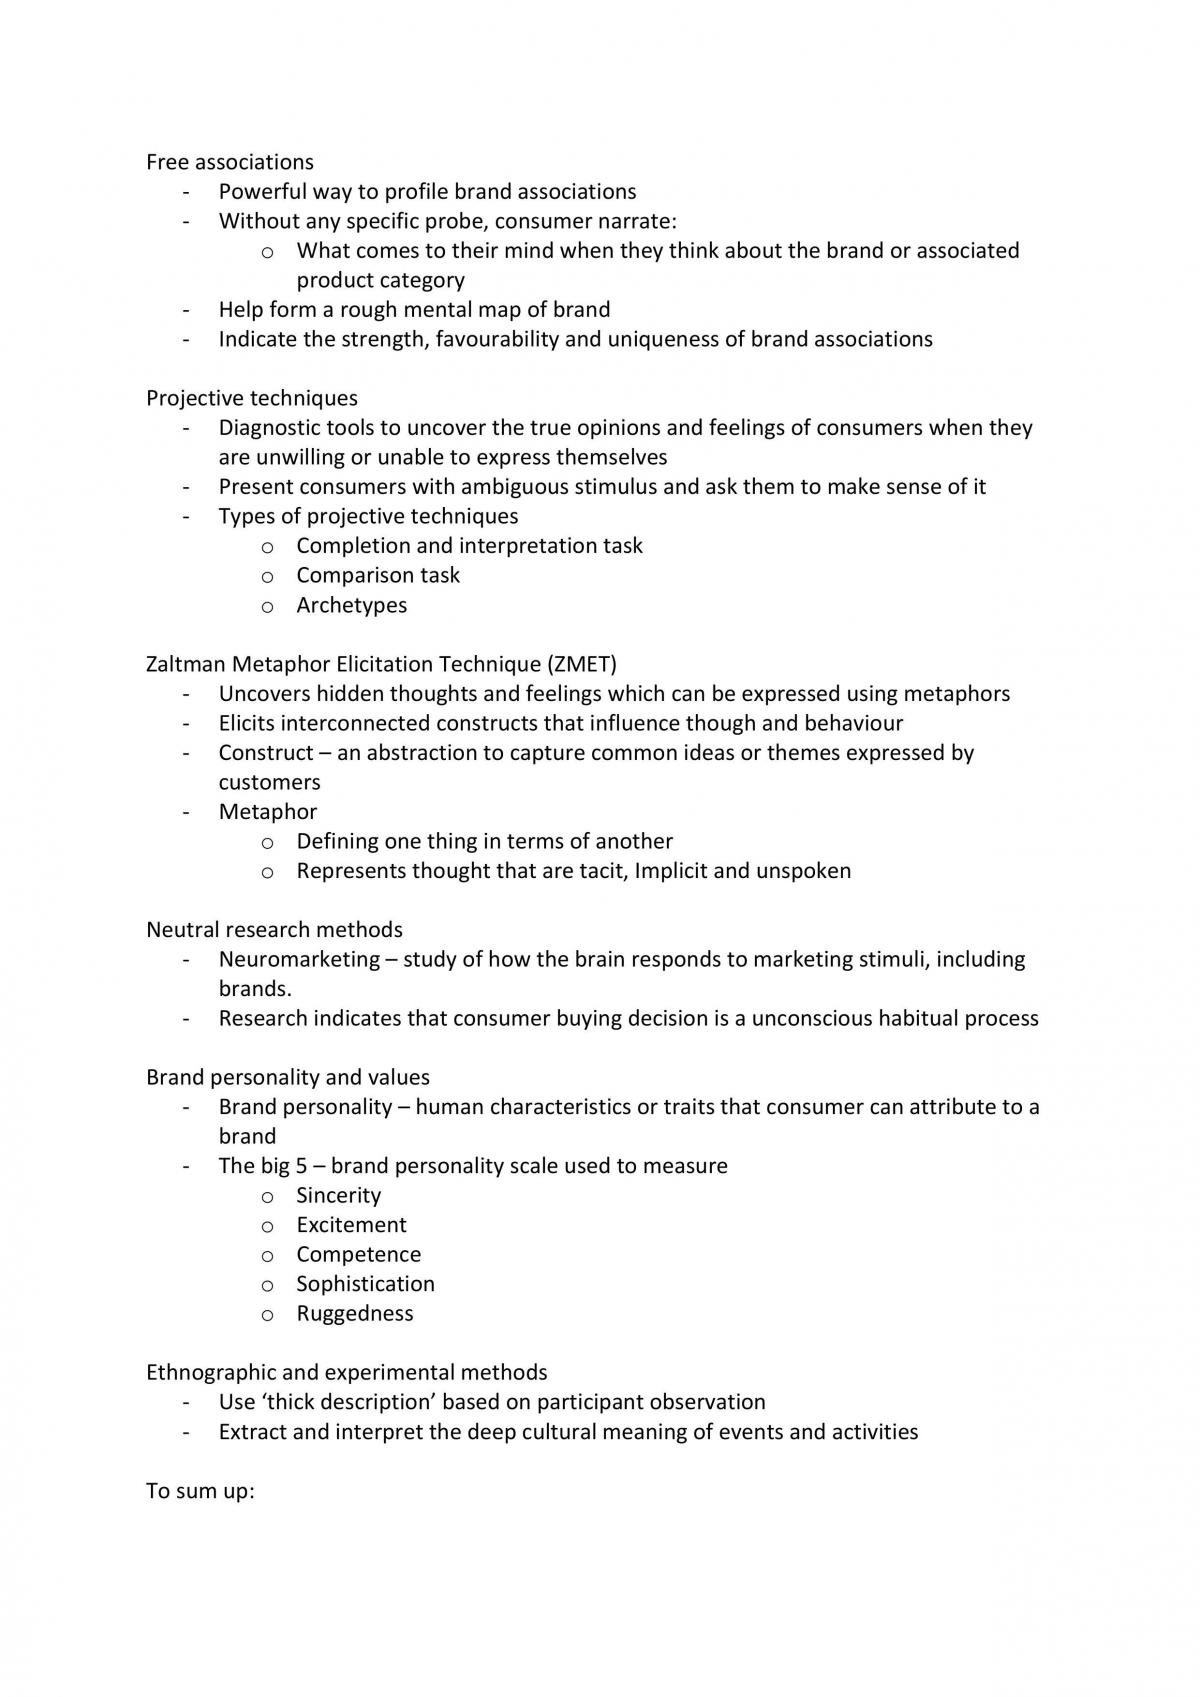 MKTG3120 Notes - Page 37